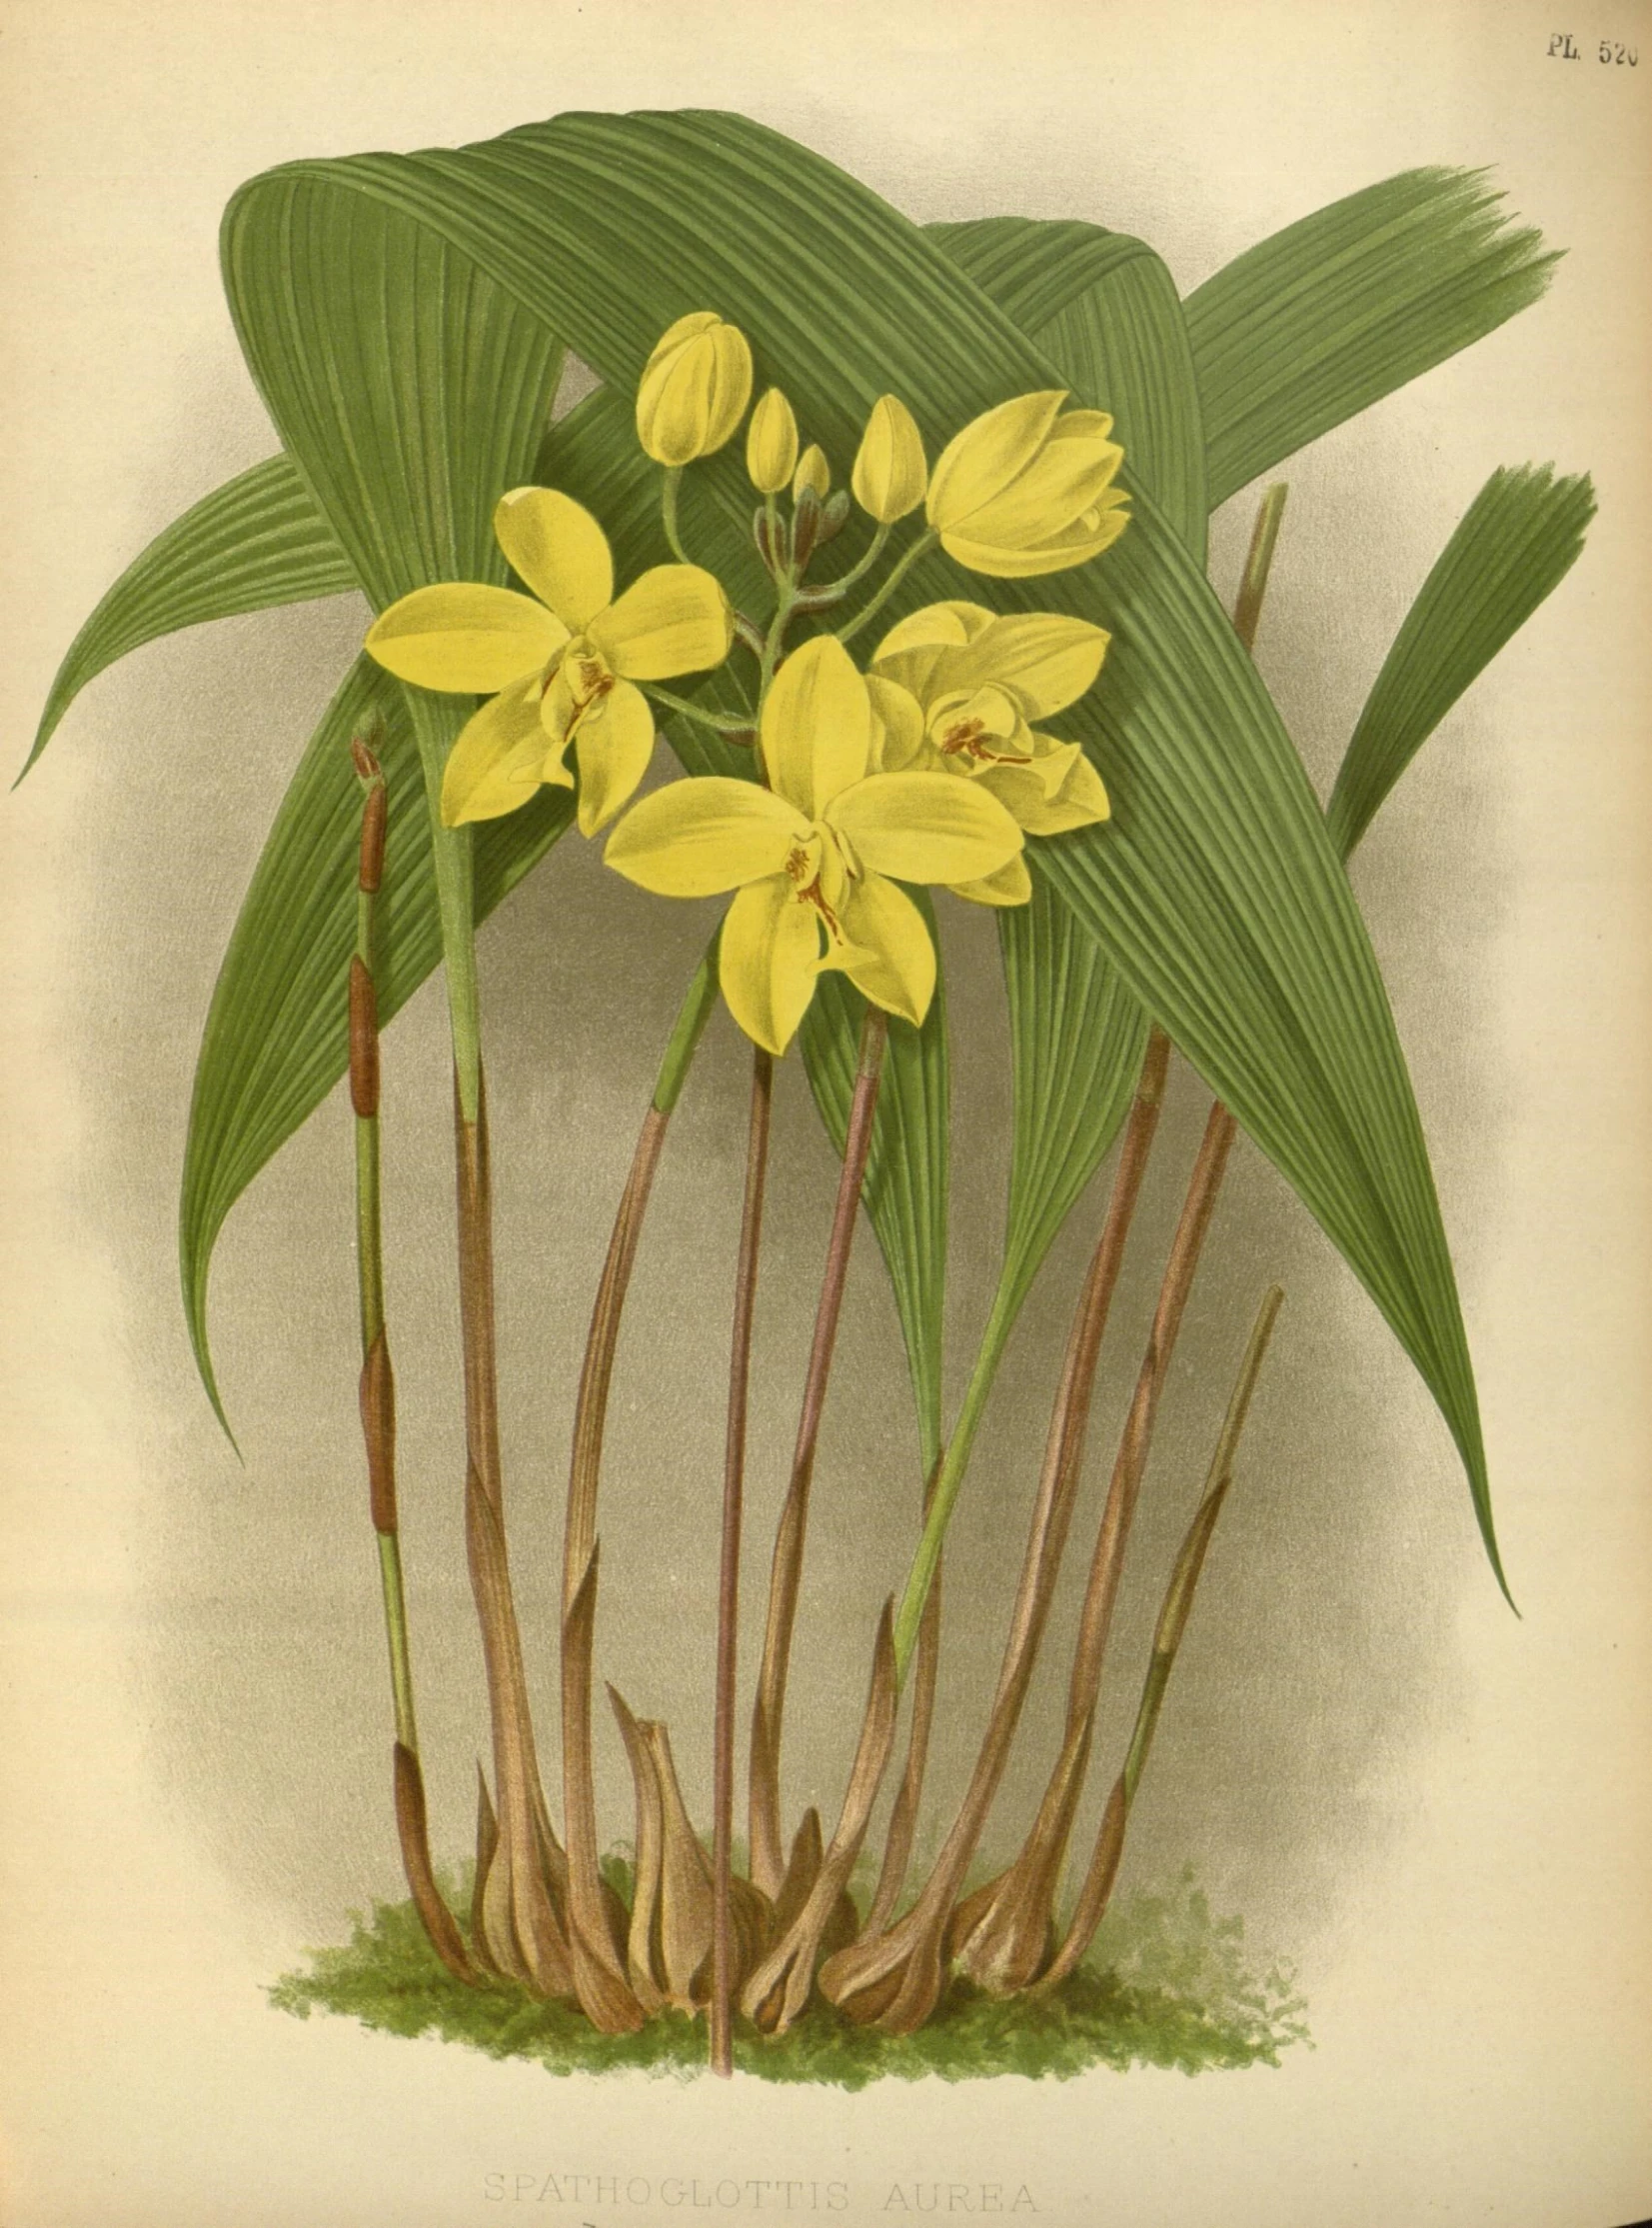 a vintage illustration of a flowering plant with yellow flowers